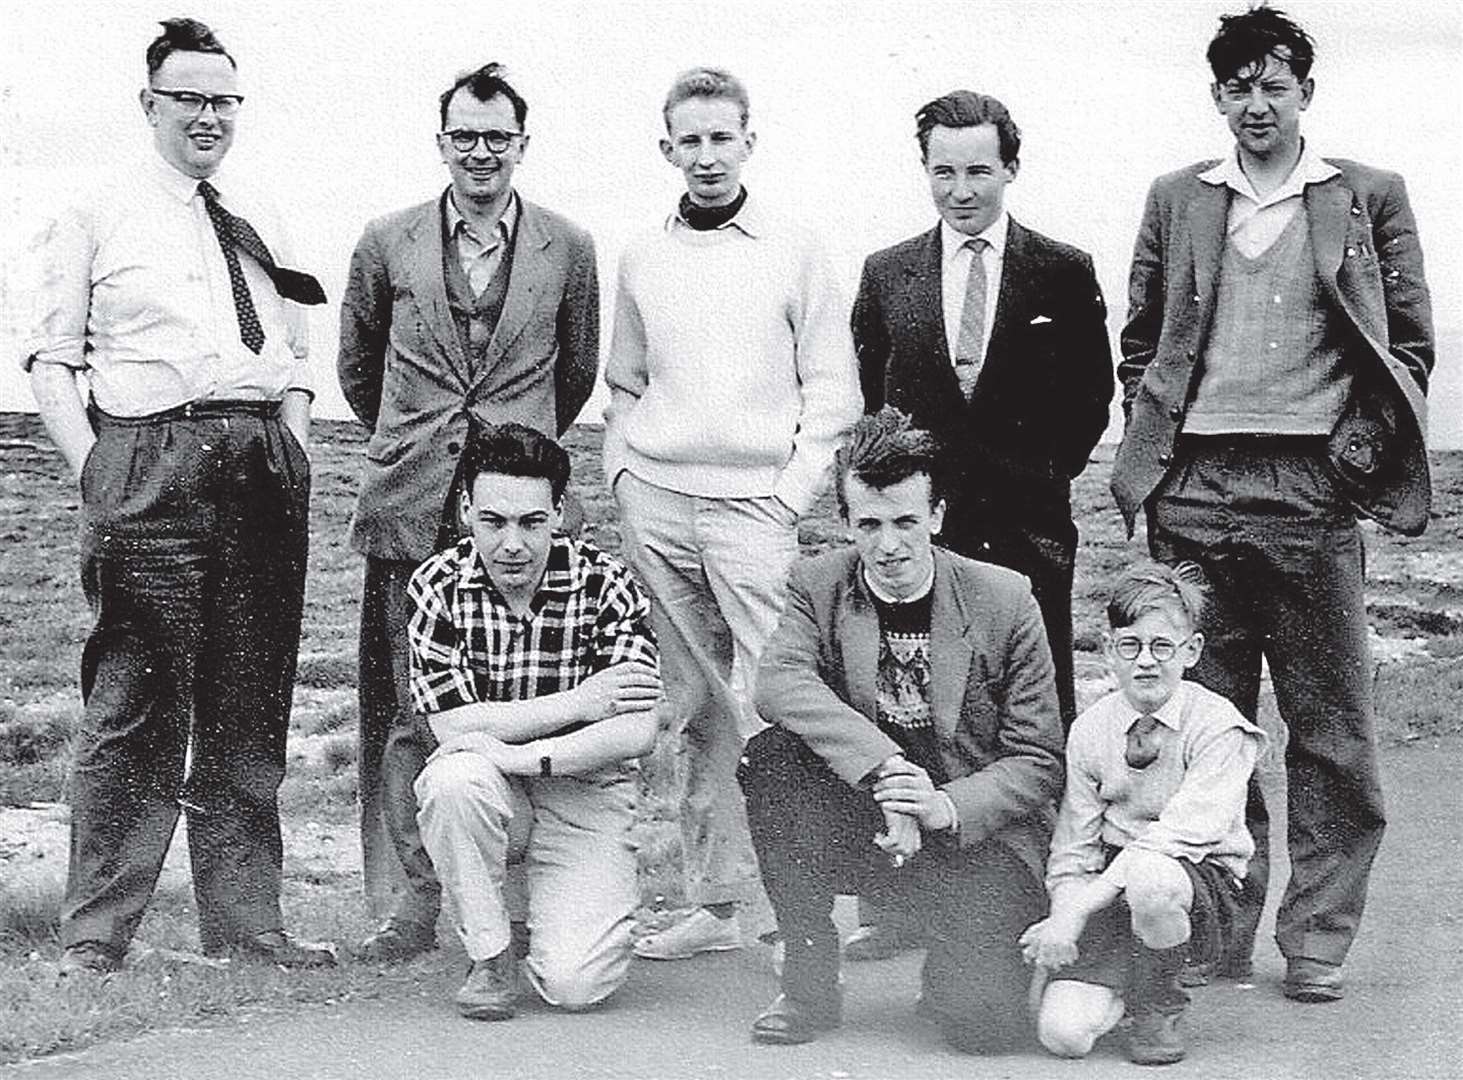 Some members of Caithness Amateur Radio Society who gathered for the 1965 National Field Day for amateur radio clubs.